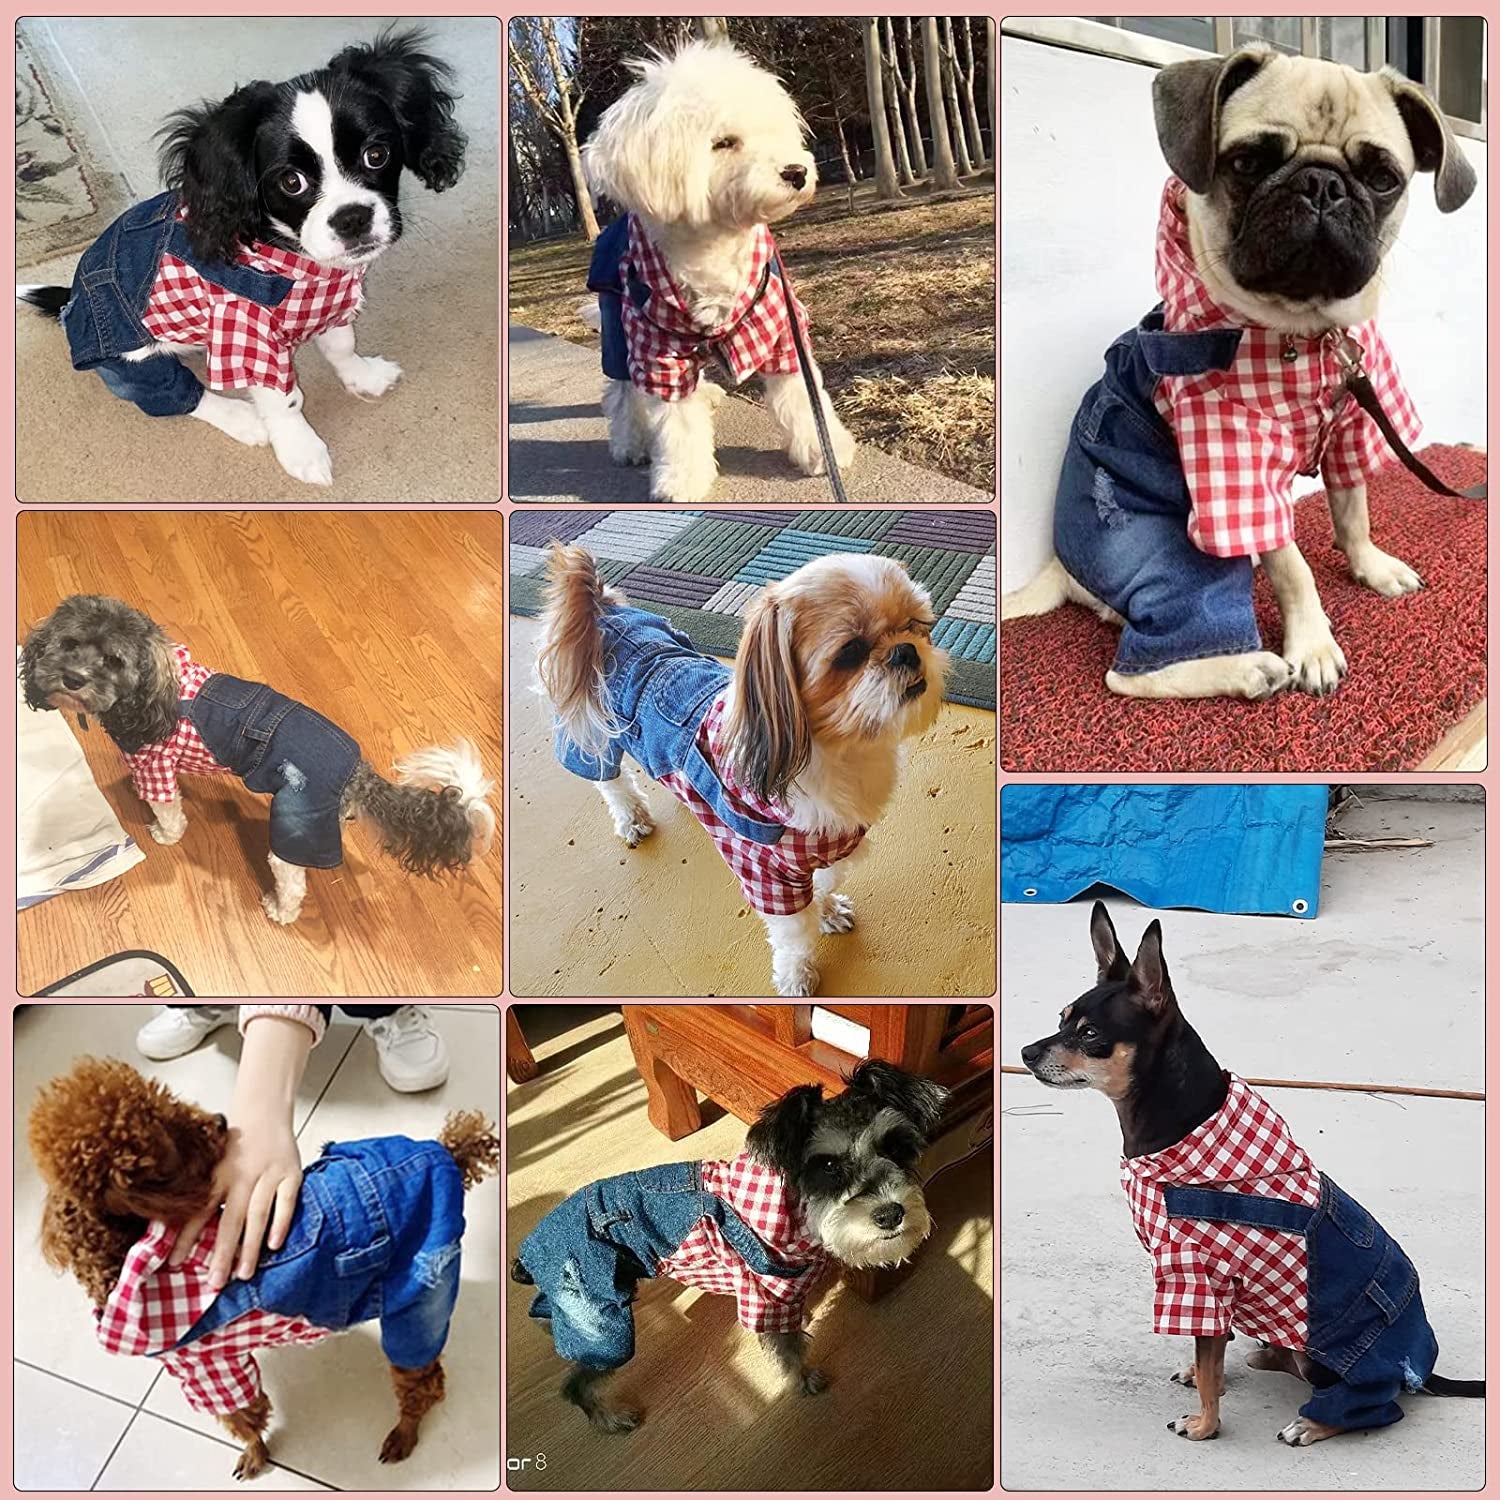 PETCARE Pet Dog Denim Jumpsuit Plaid Hoodies Puppy Overalls Doggy Jeans Jacket Clothes for Small Dogs Cats Chihuahua Yorkie Spring Summer Costume Outfit Animals & Pet Supplies > Pet Supplies > Dog Supplies > Dog Apparel Yi Wu Shi Jia Chong Dian Zi Shang Wu Shang Hang   